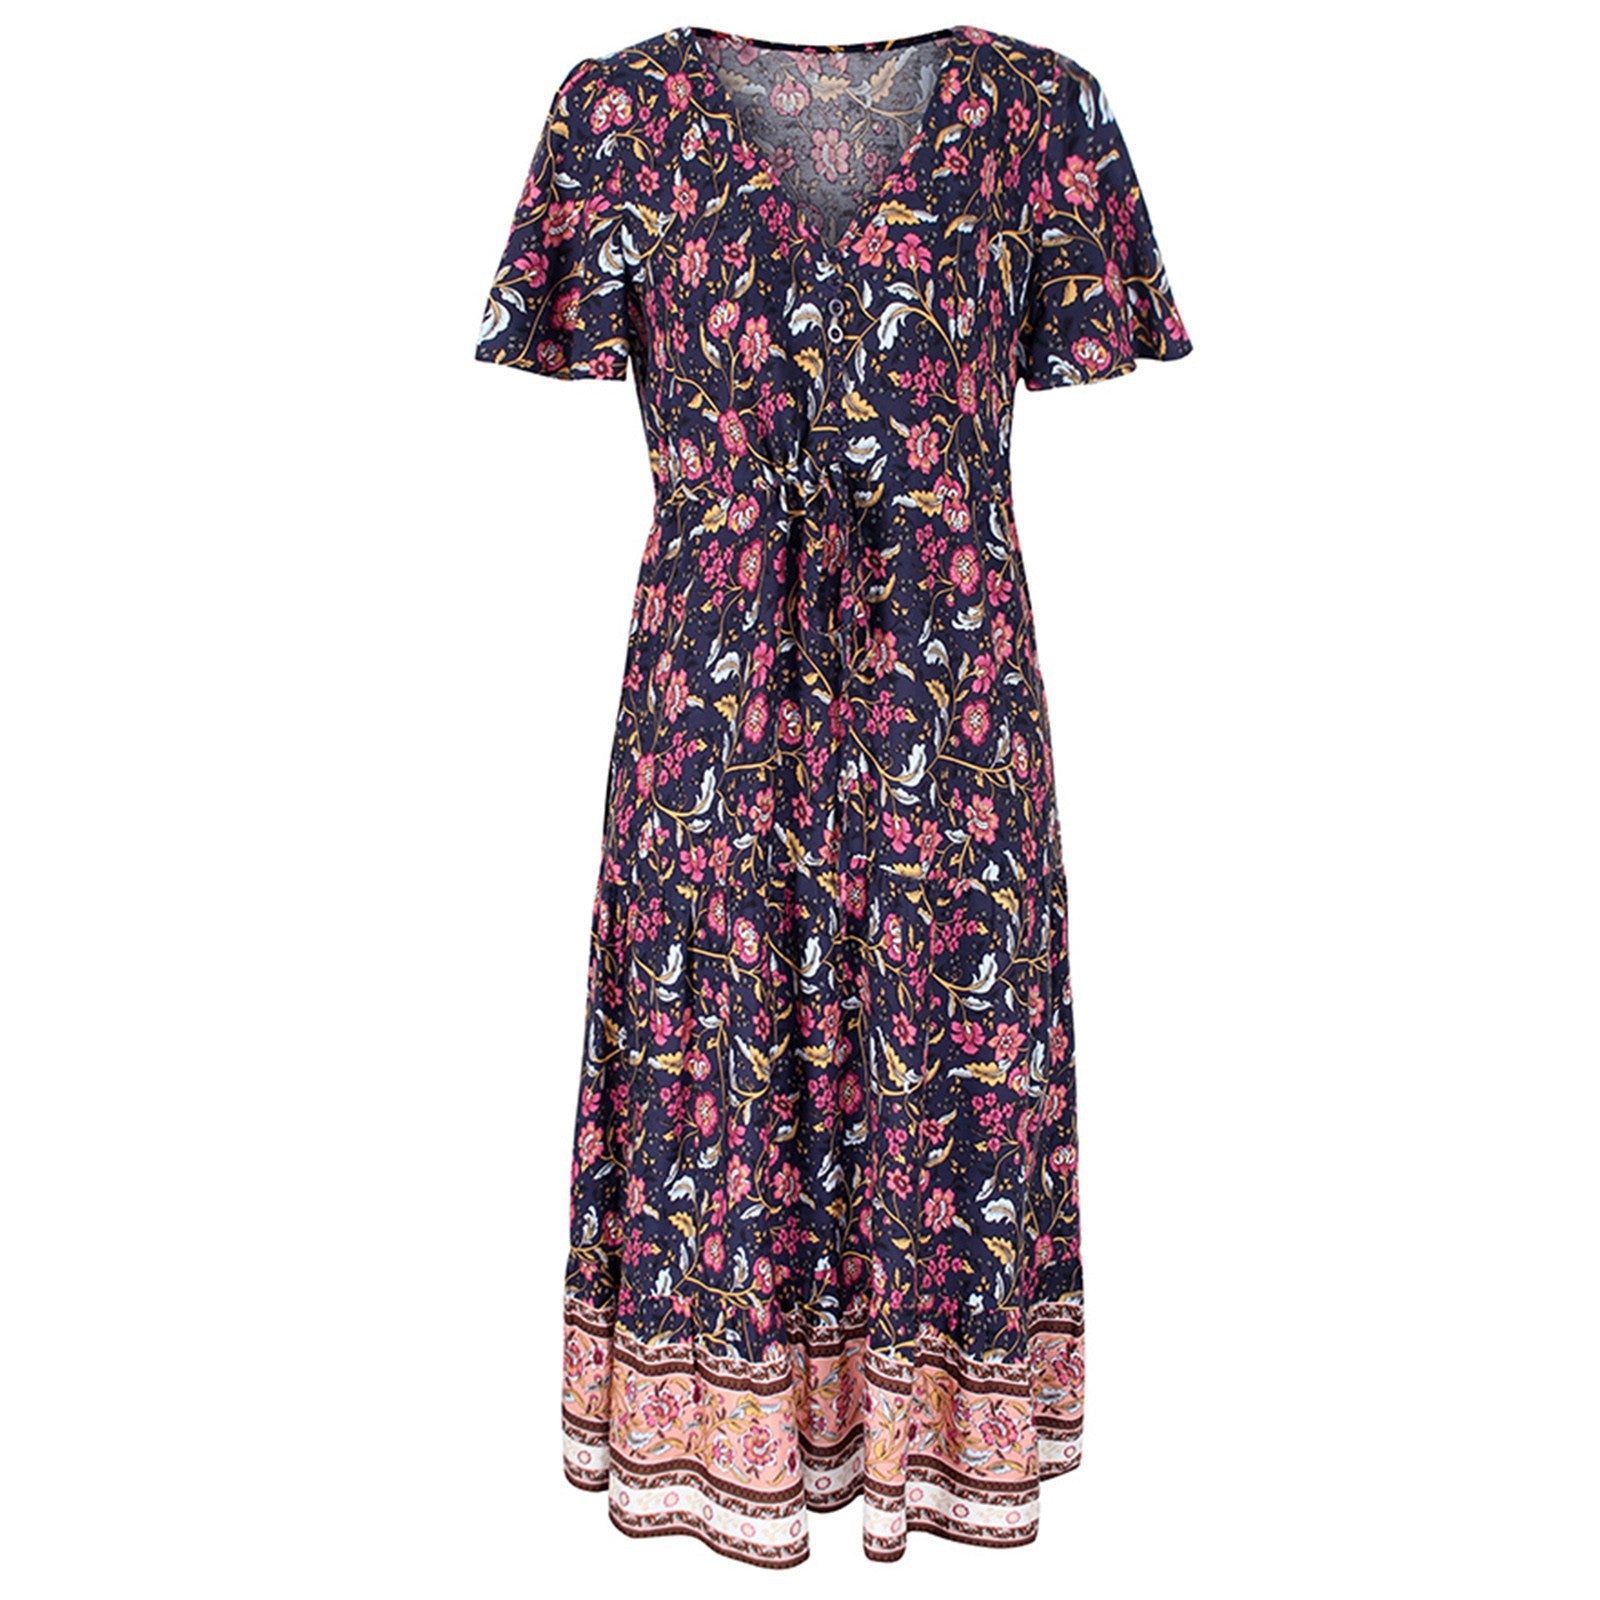 Women's Fit Small Floral Print Mid-length V-neck Dresses